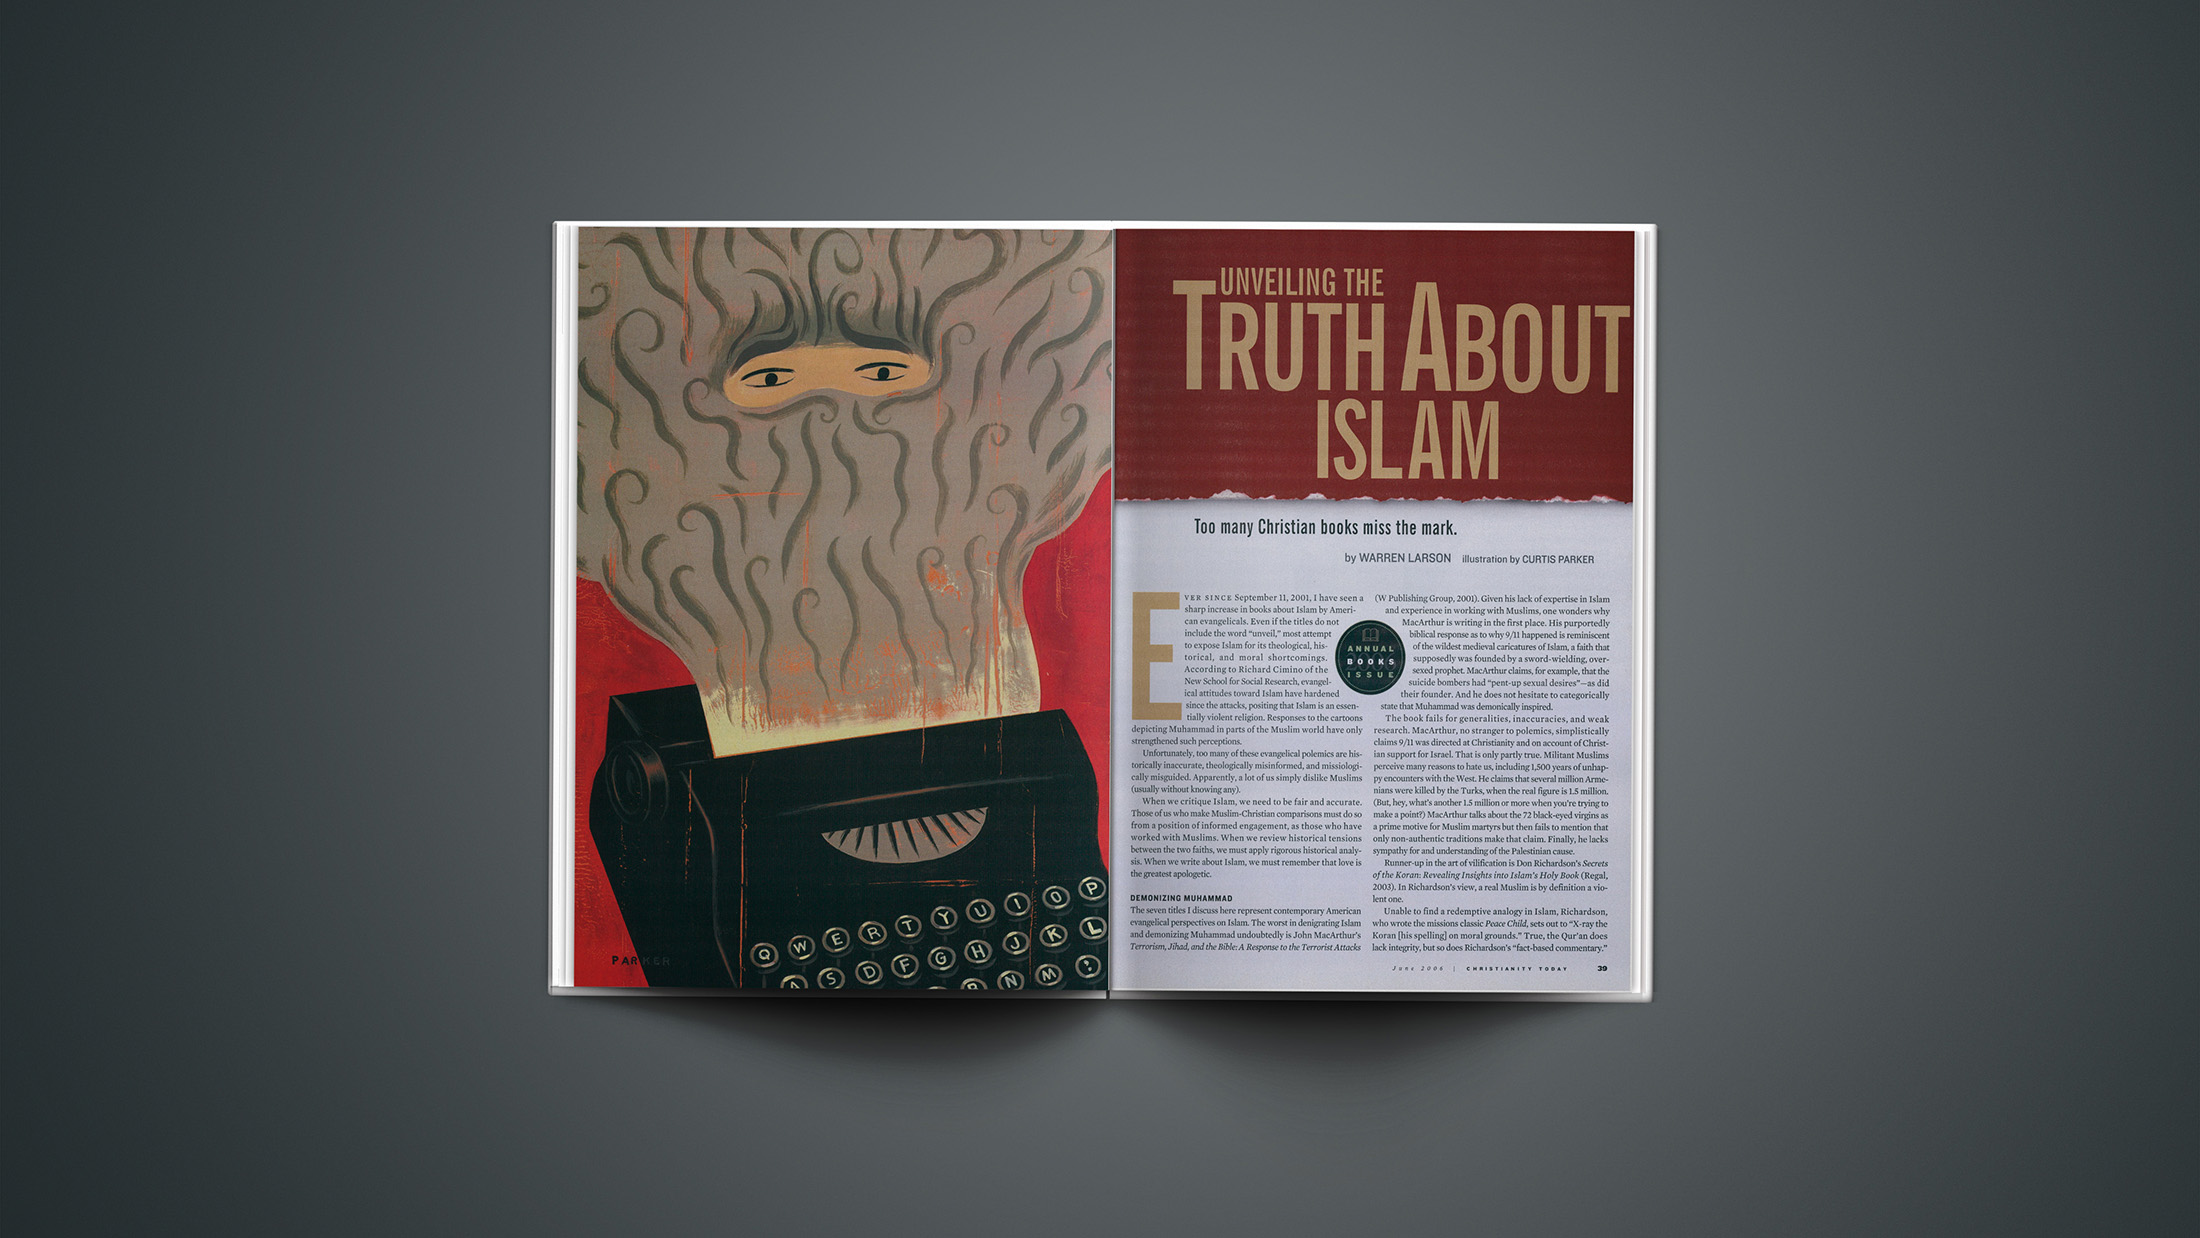 Unveiling the Truth About Islam Christianity Today pic photo